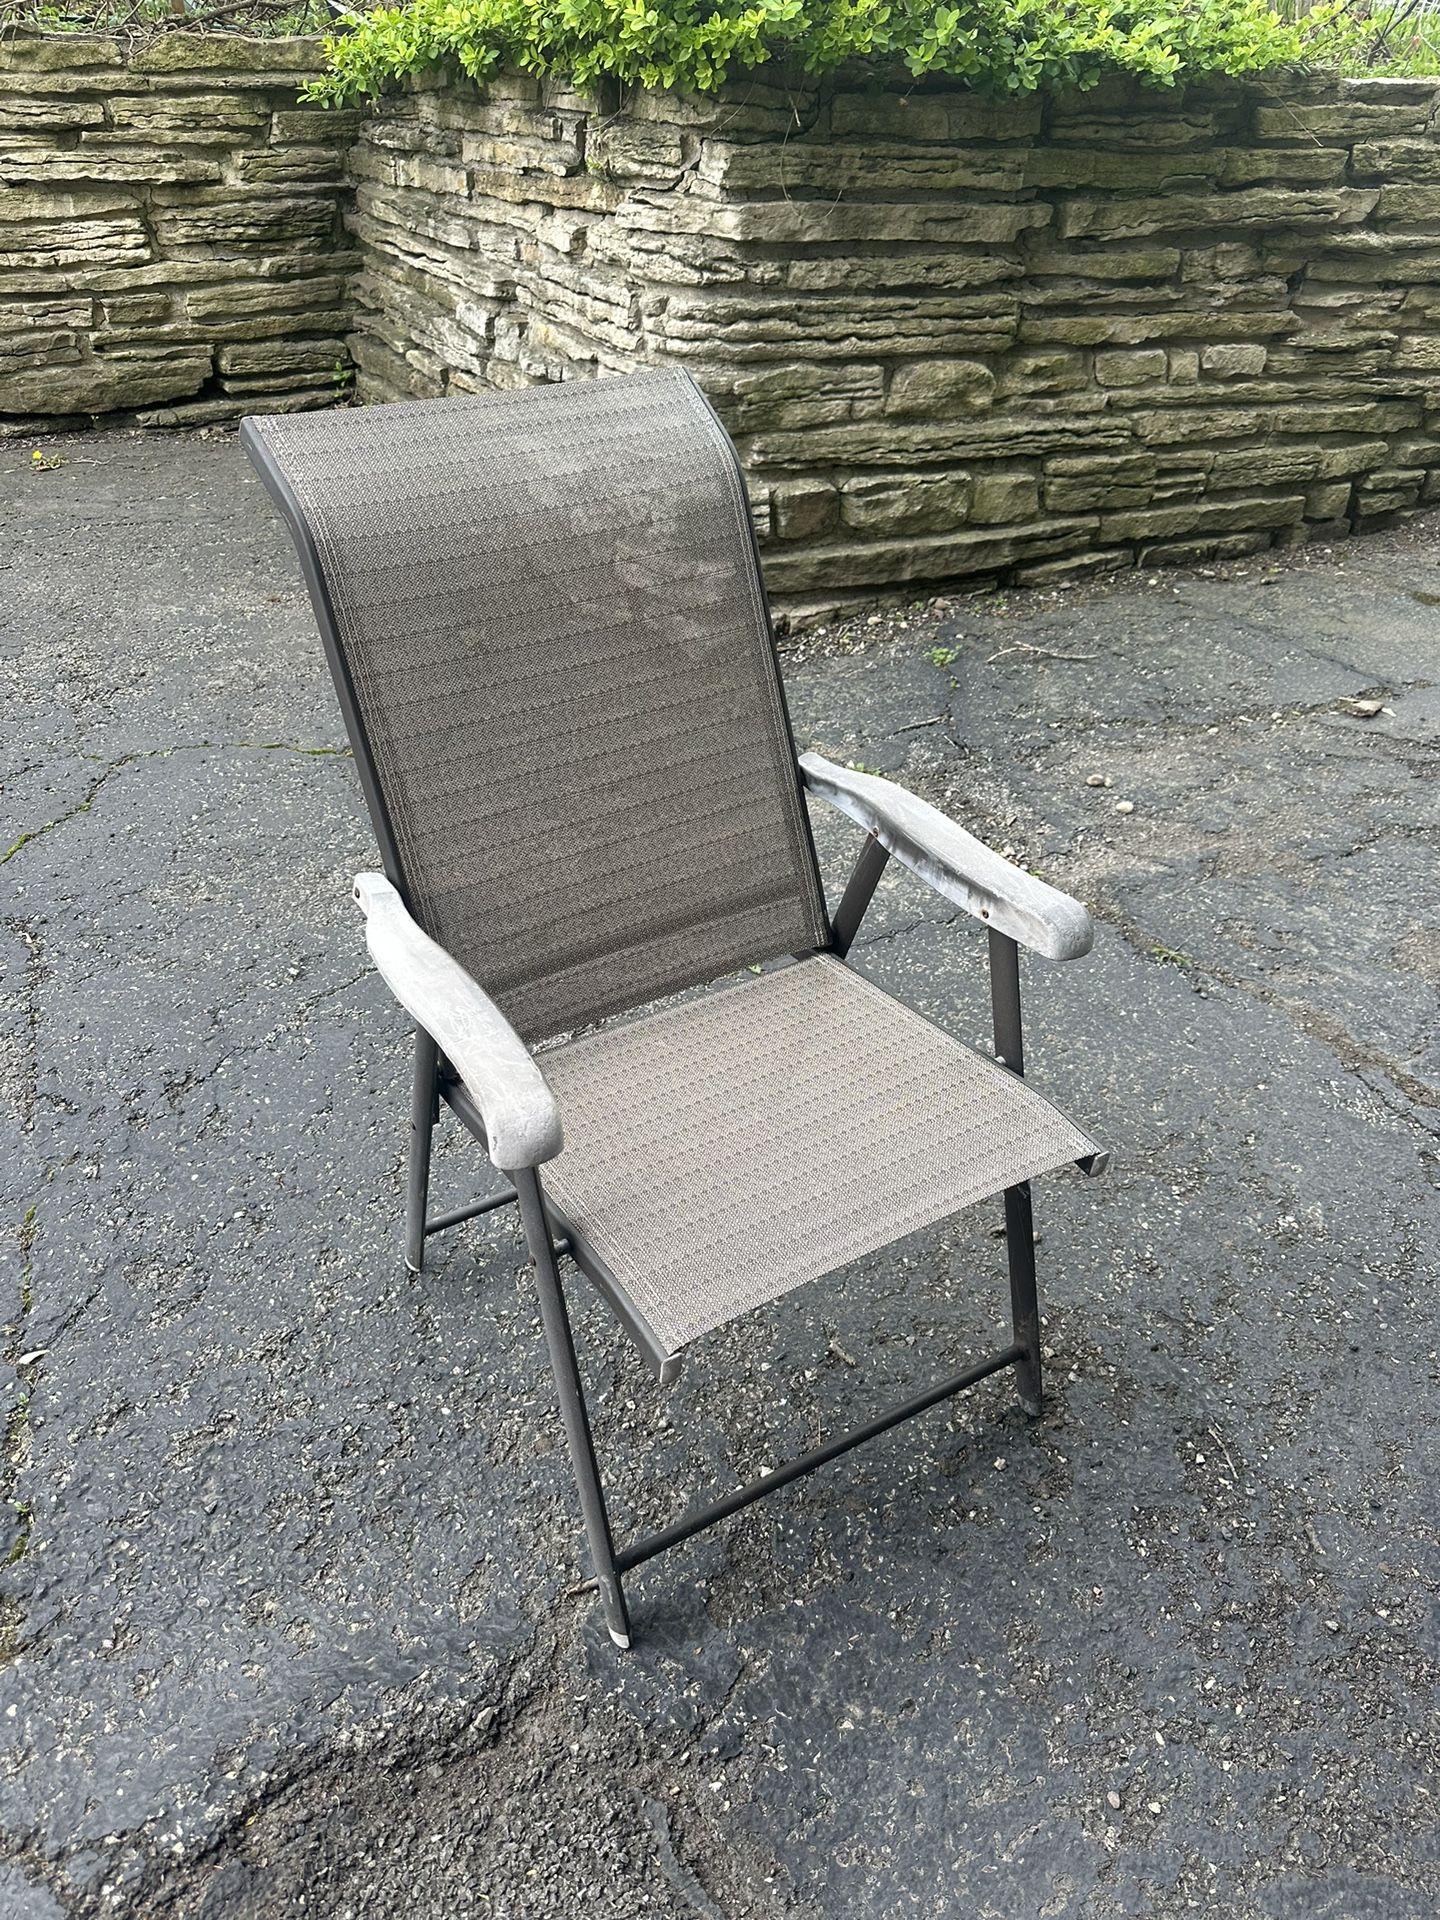 6 Good Condition Lawn Chairs. Pretty Good Condition 